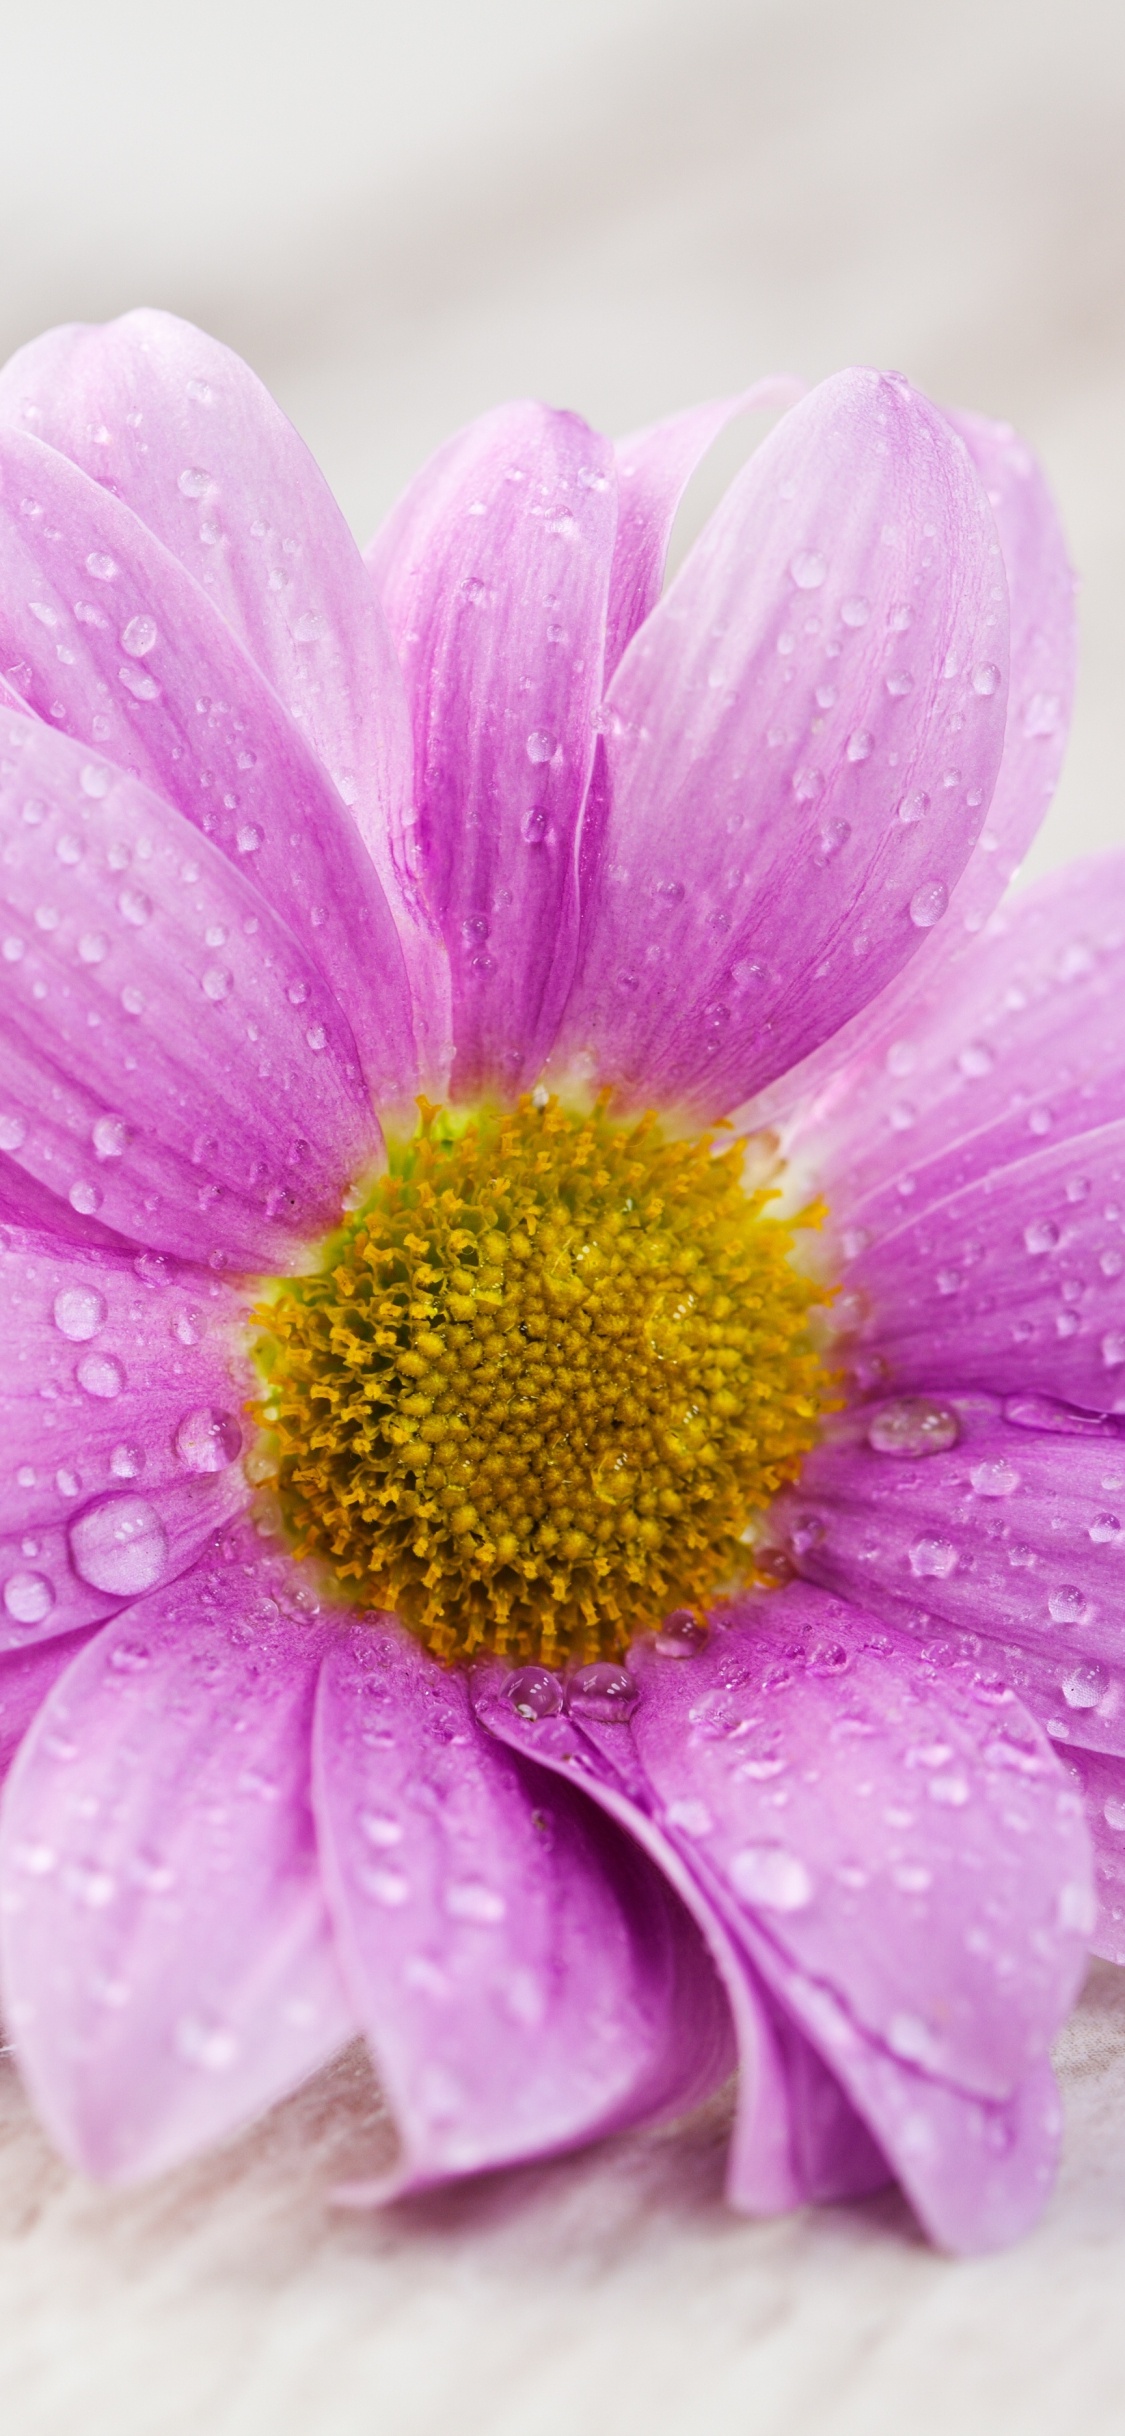 Pink Flower on White Surface. Wallpaper in 1125x2436 Resolution